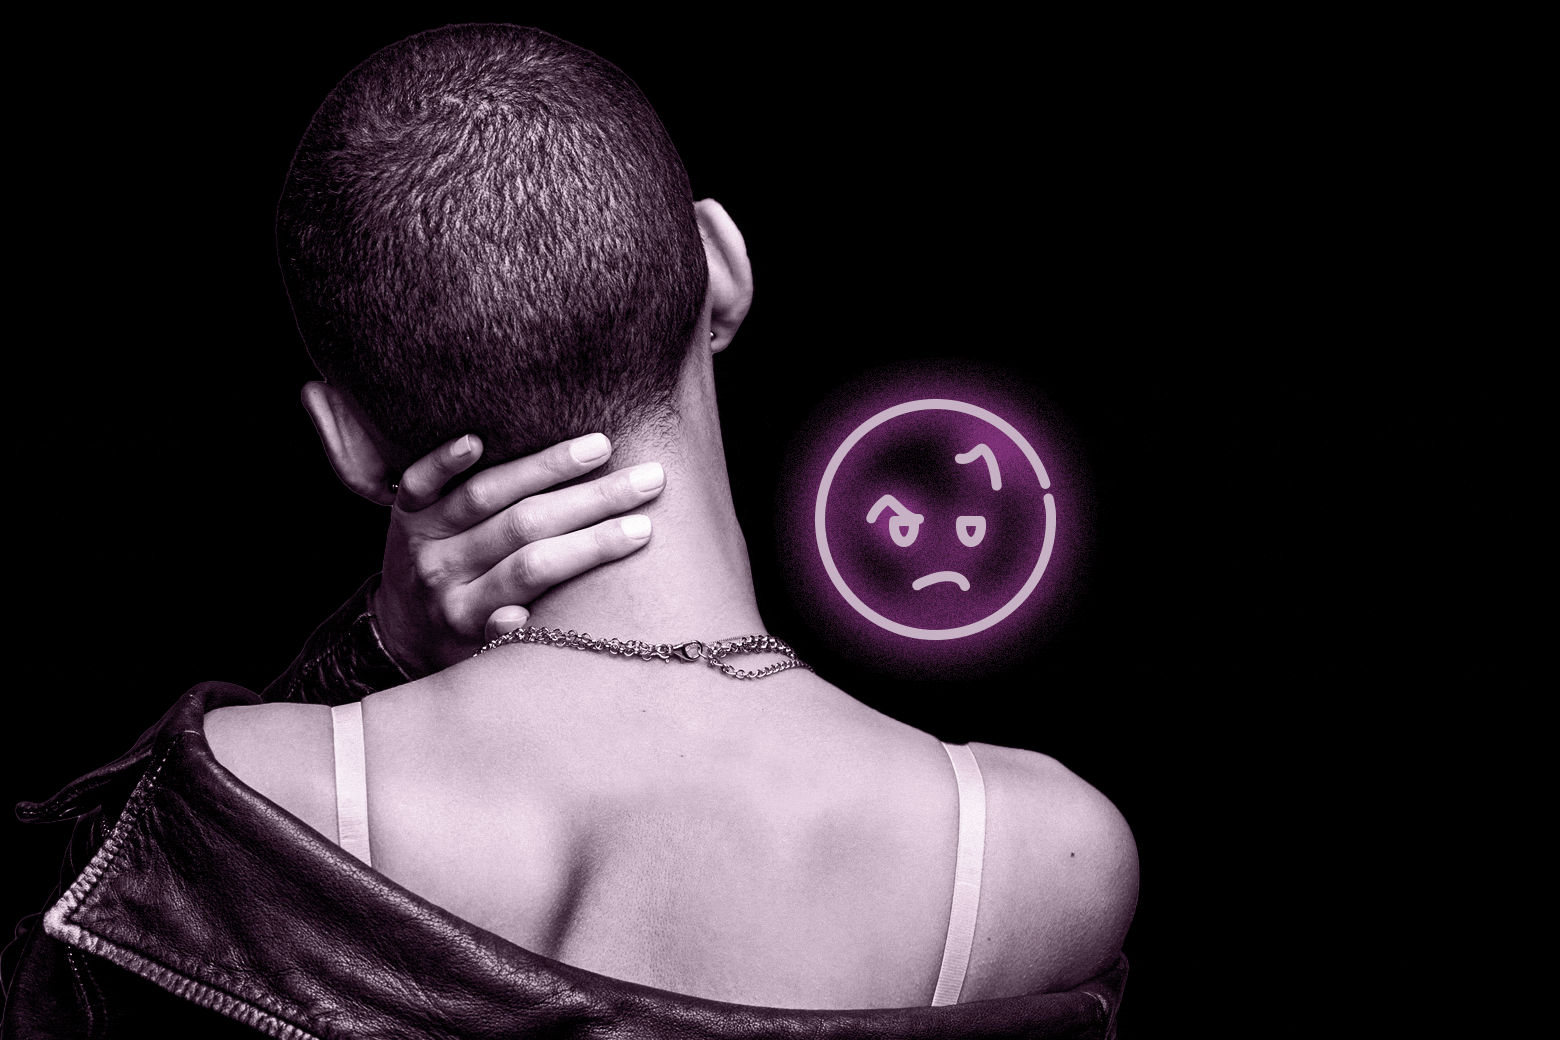 Someone's back, while they hold their neck. A questioning emoji floats next to them.